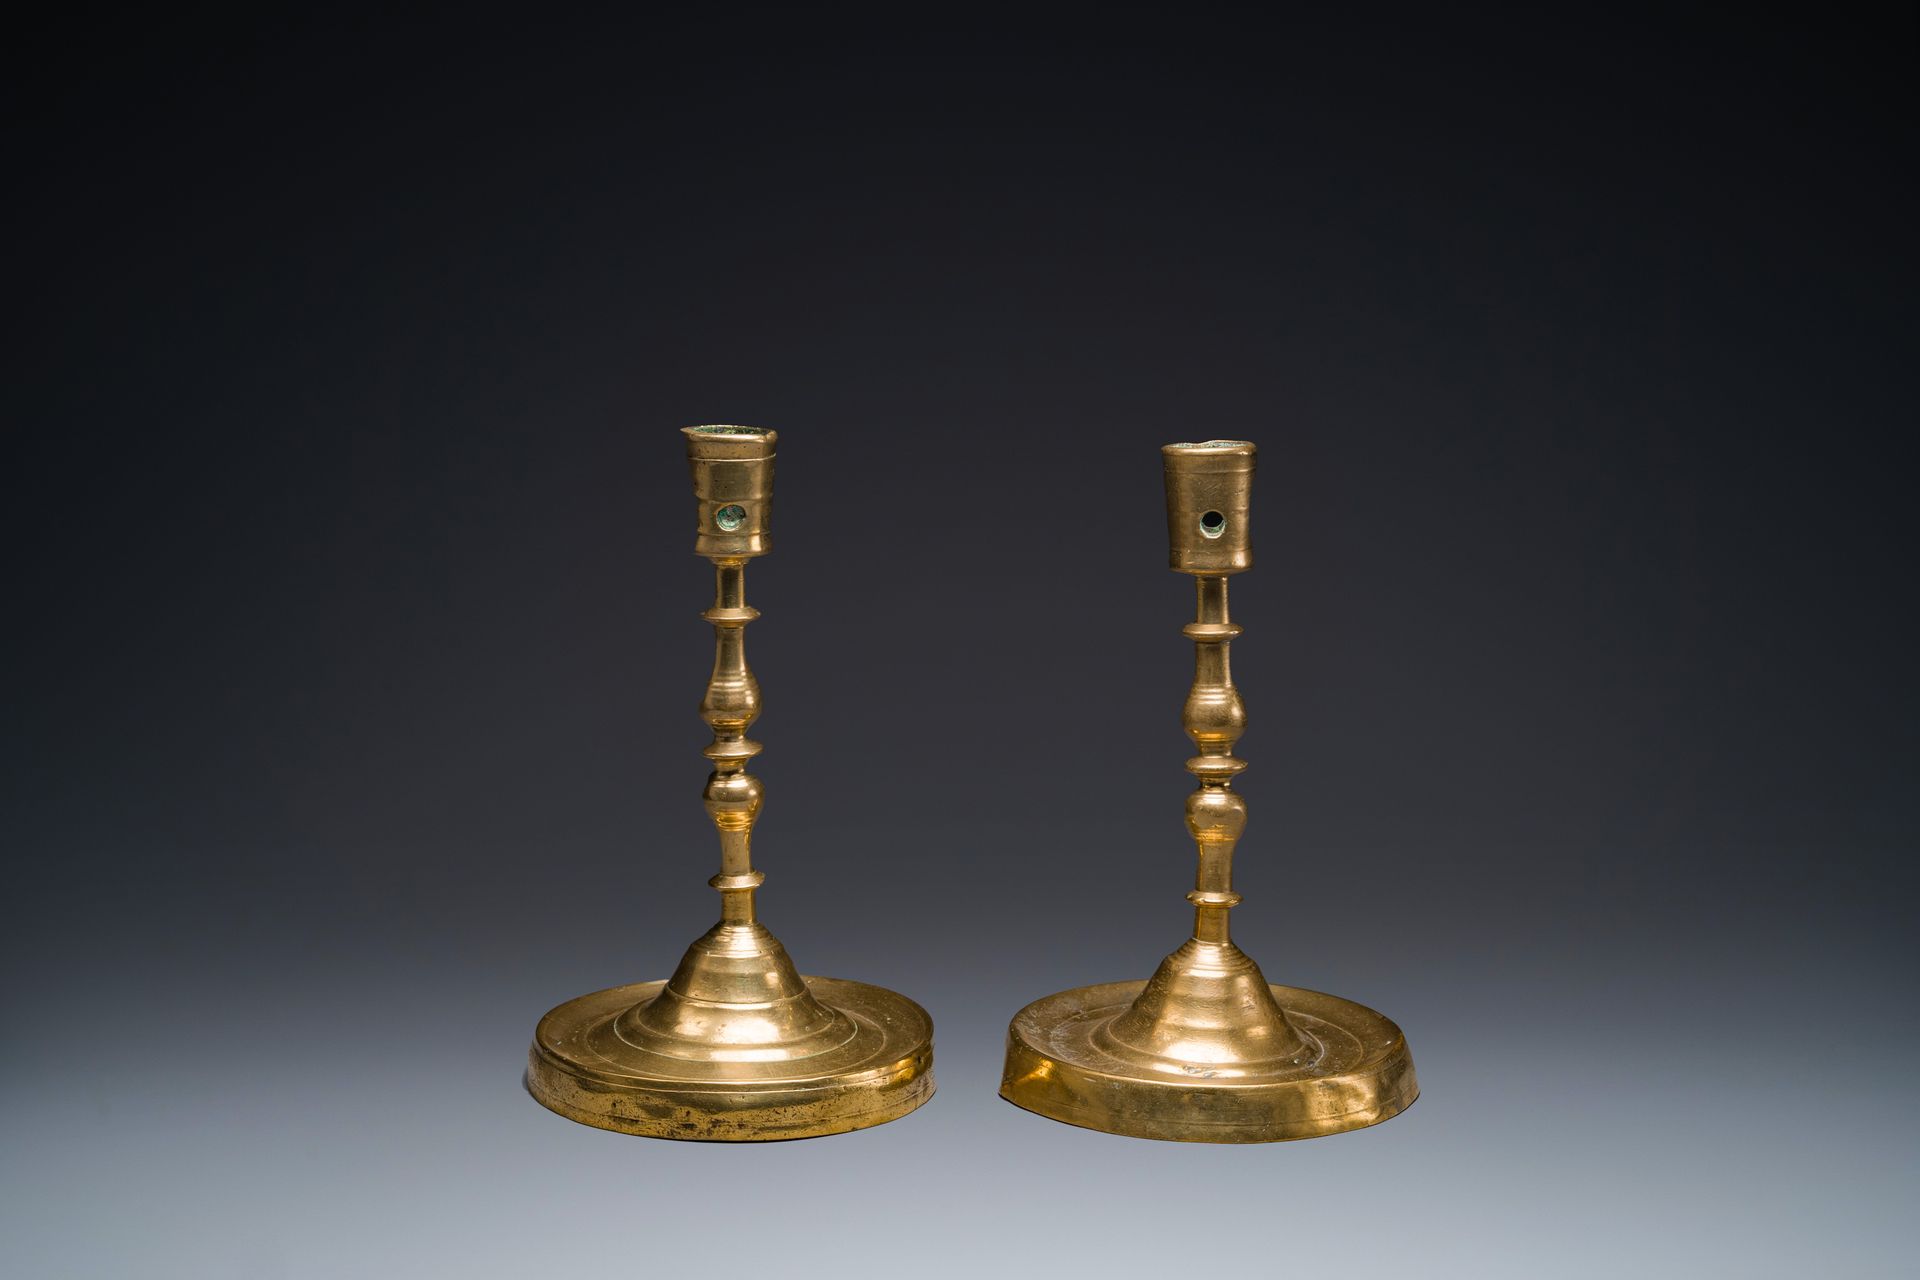 A pair of Flemish or Dutch knotted bronze candlesticks, 16th C. Coppia di candel&hellip;